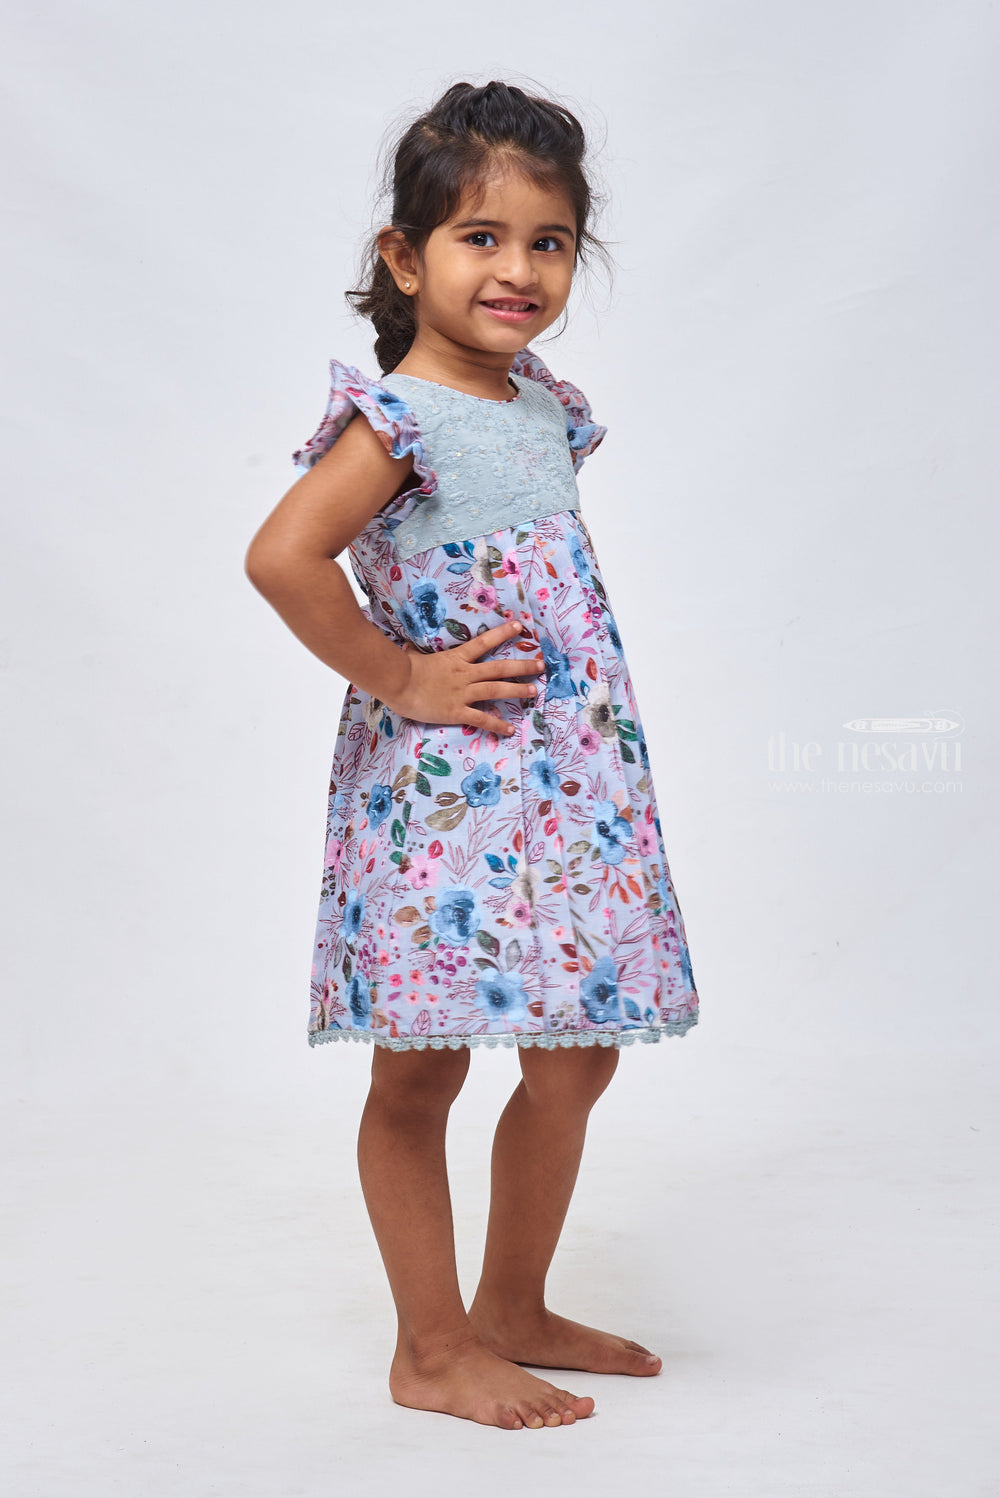 The Nesavu Baby Cotton Frocks Emerald Essence: Floral Elegance on Knife-Pleated Fancy Frock for Little Charms Nesavu Quality Newborn Clothes | Best Baby Clothes Websites | The Nesavu